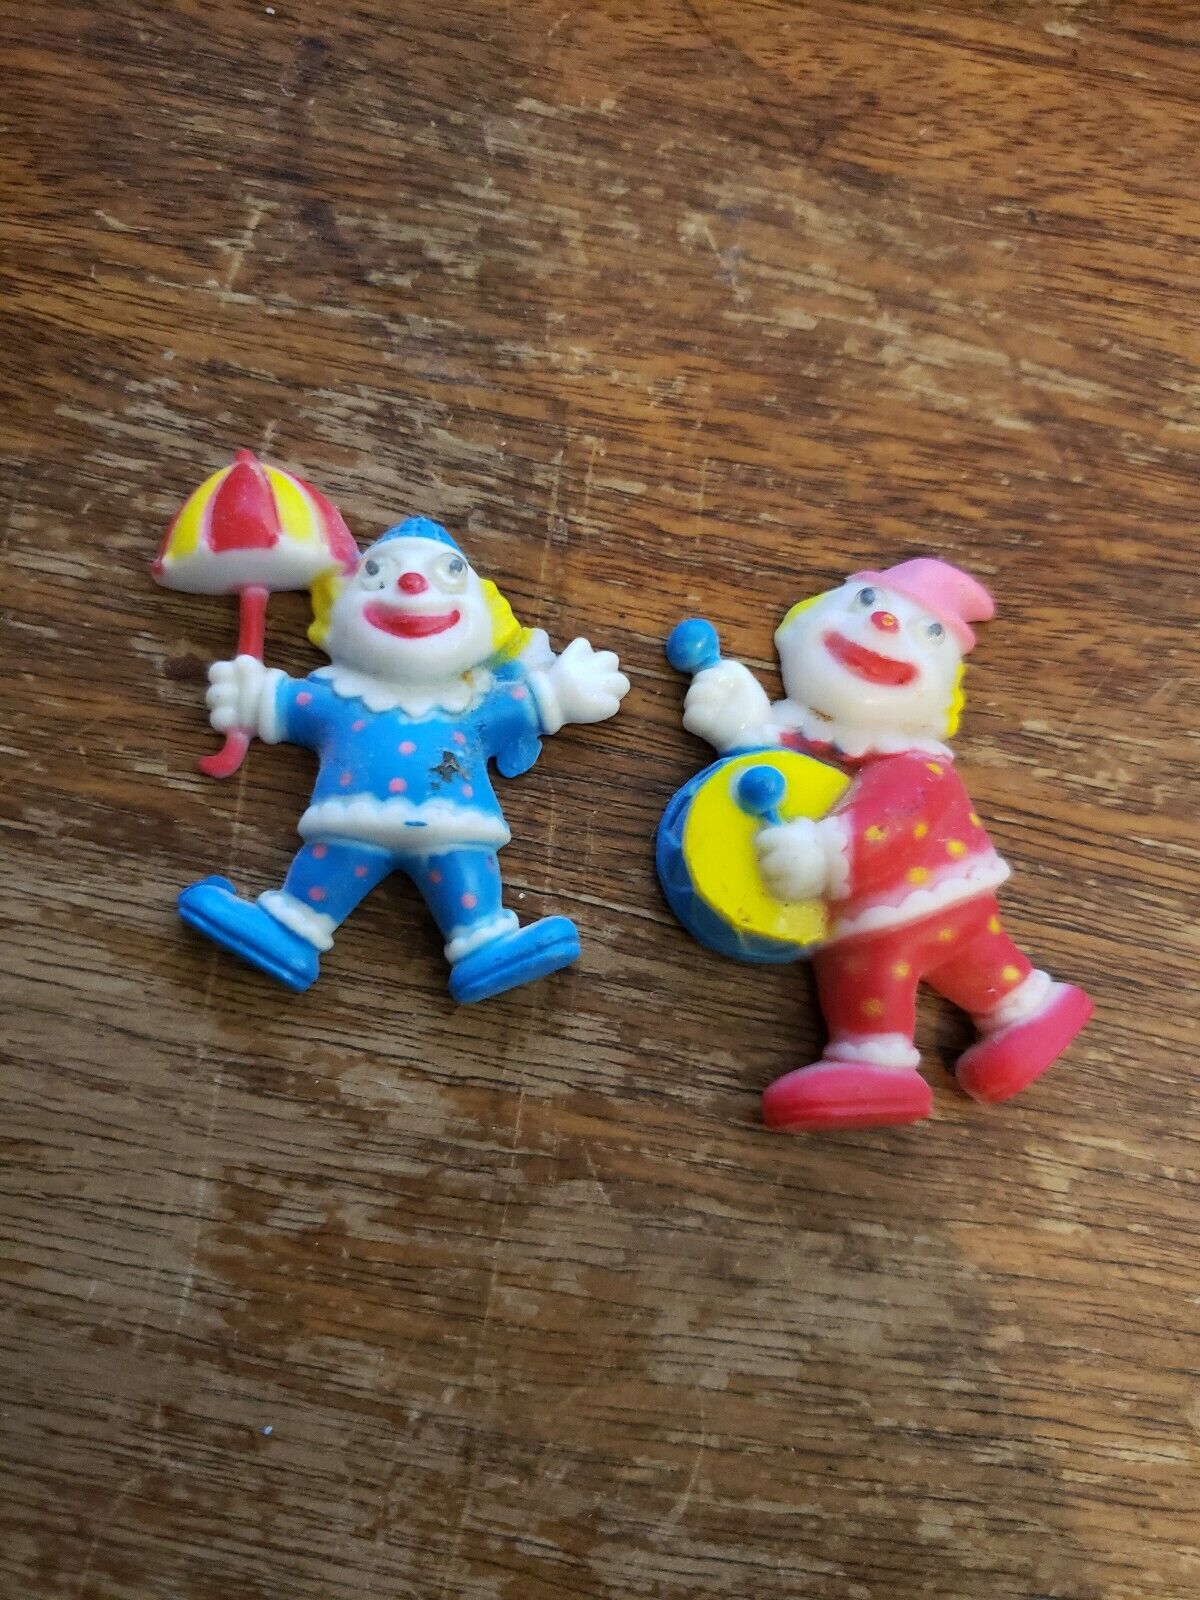 Lot of 2 Vintage Fridge Magnets Pair of Clowns Drums and Umbrella Rare